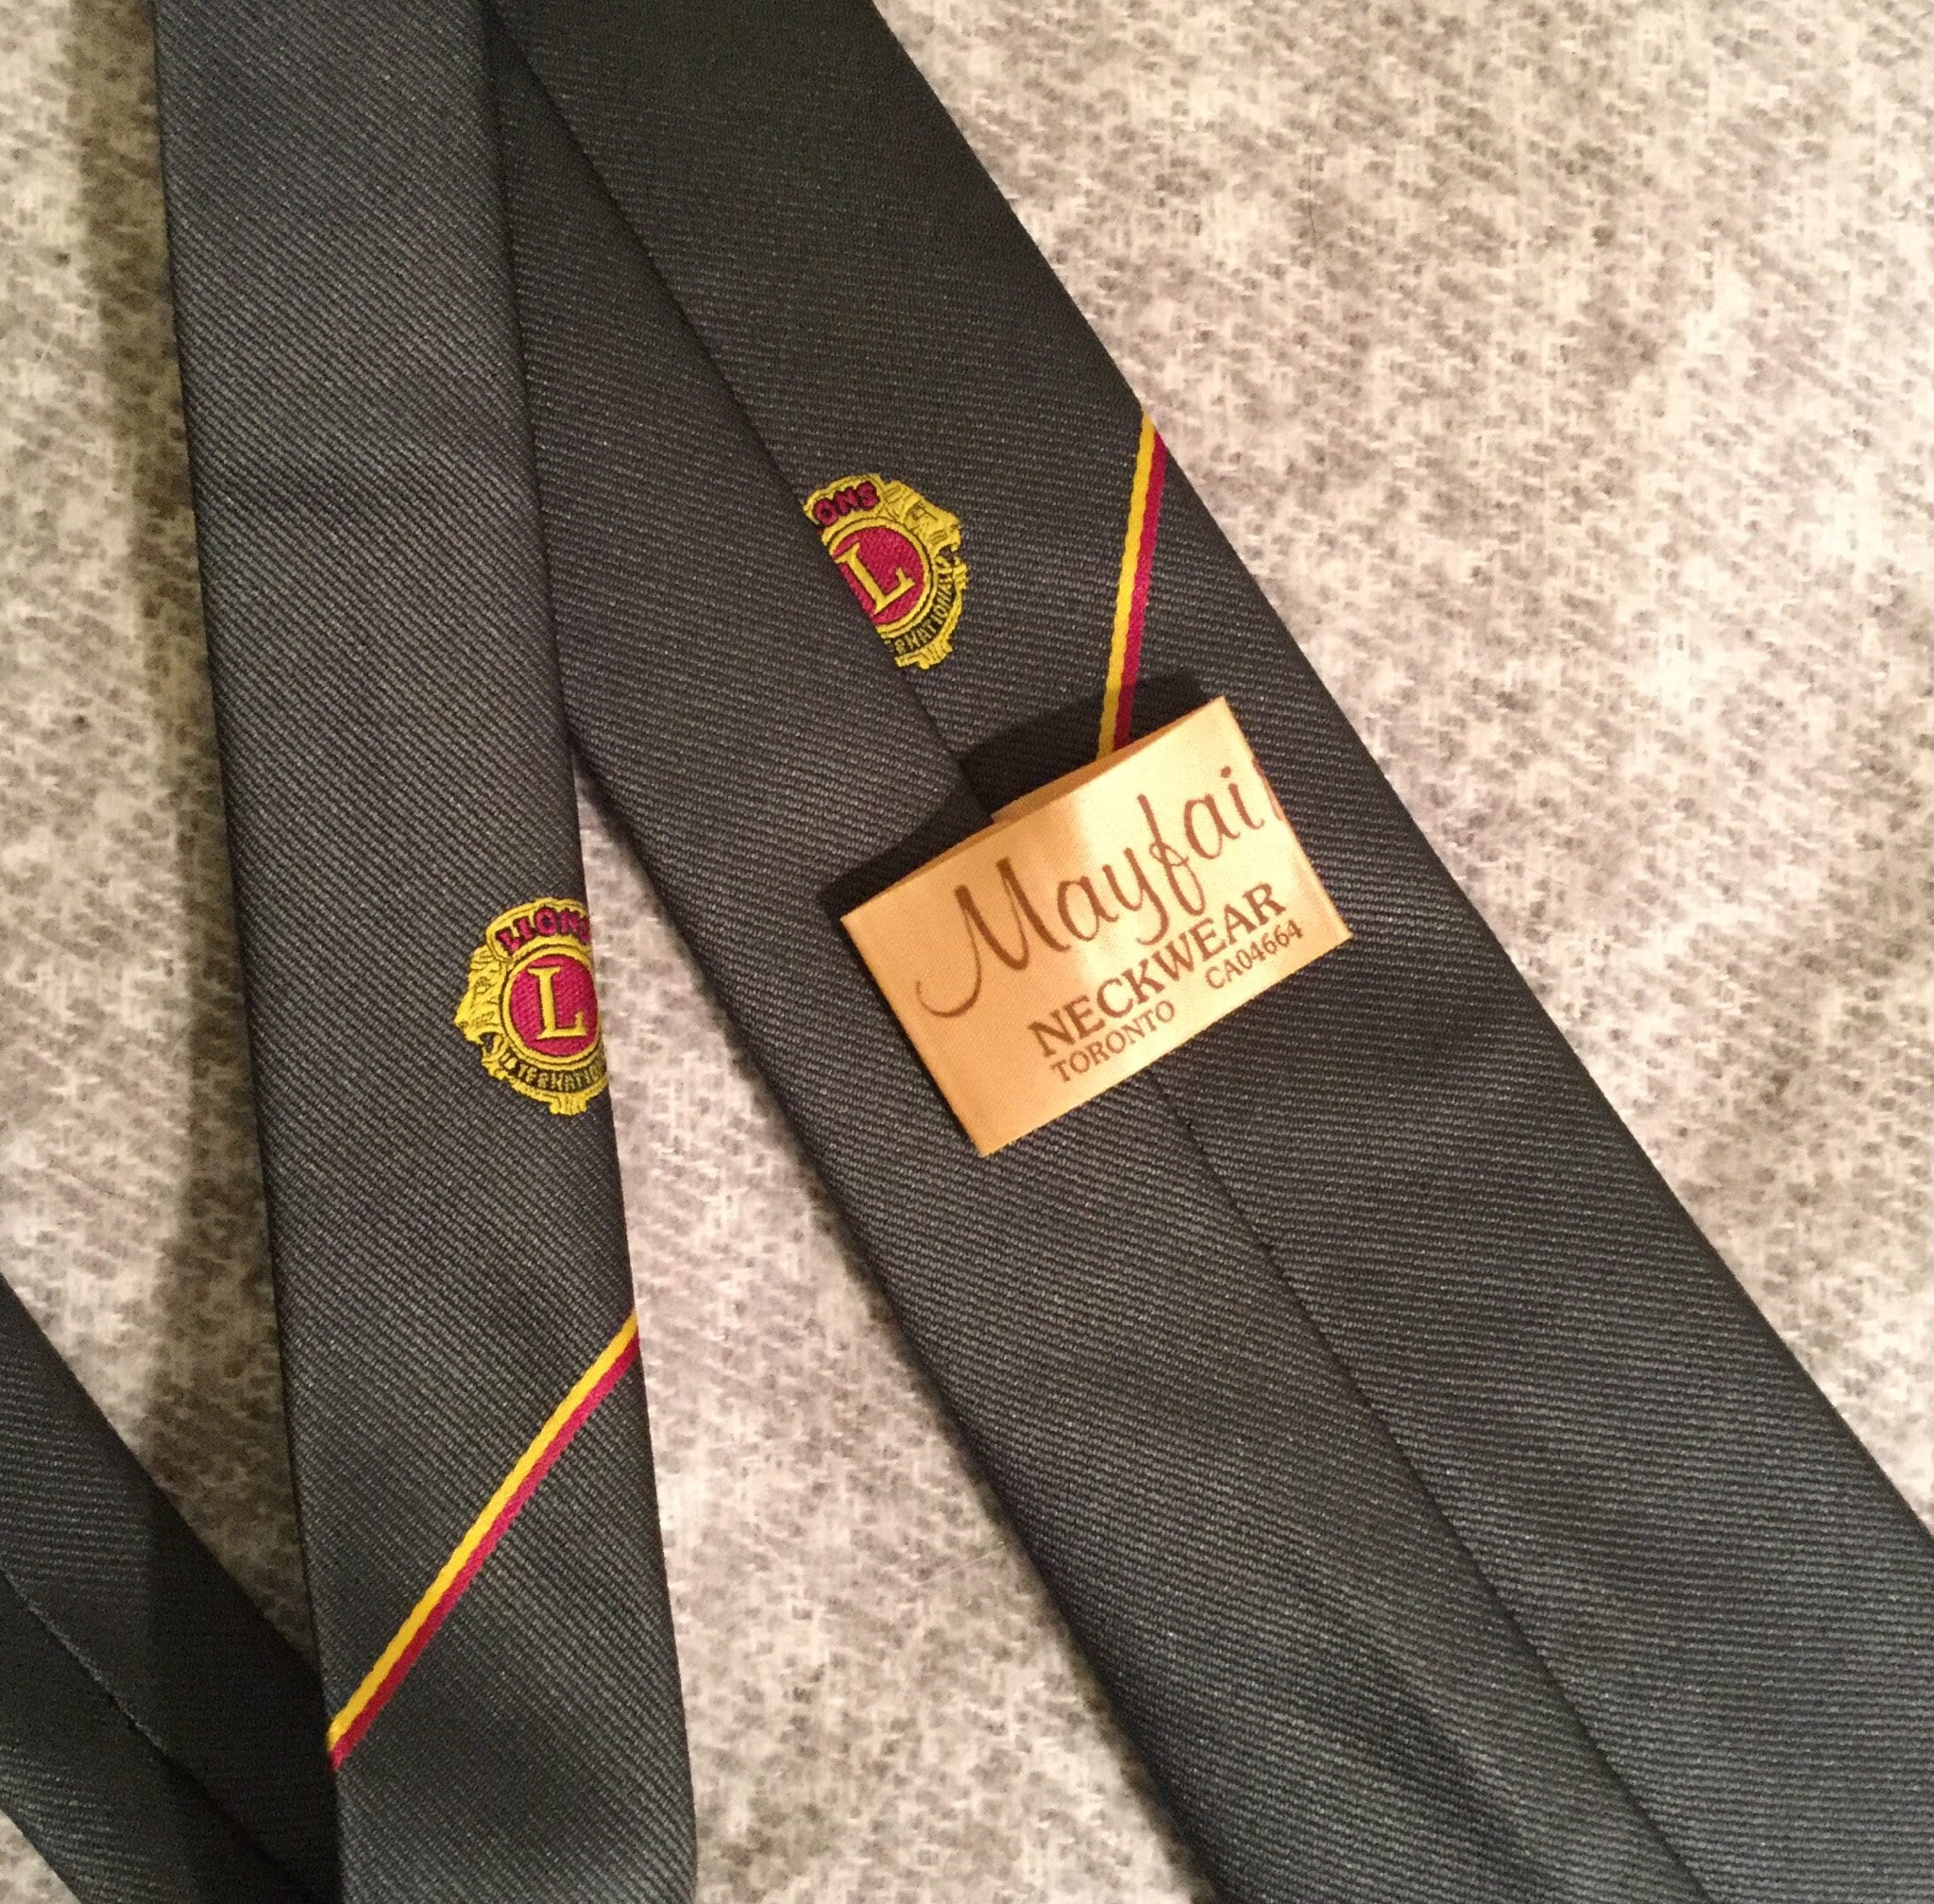 English Lion Ties, Limited Edition Ties For Men